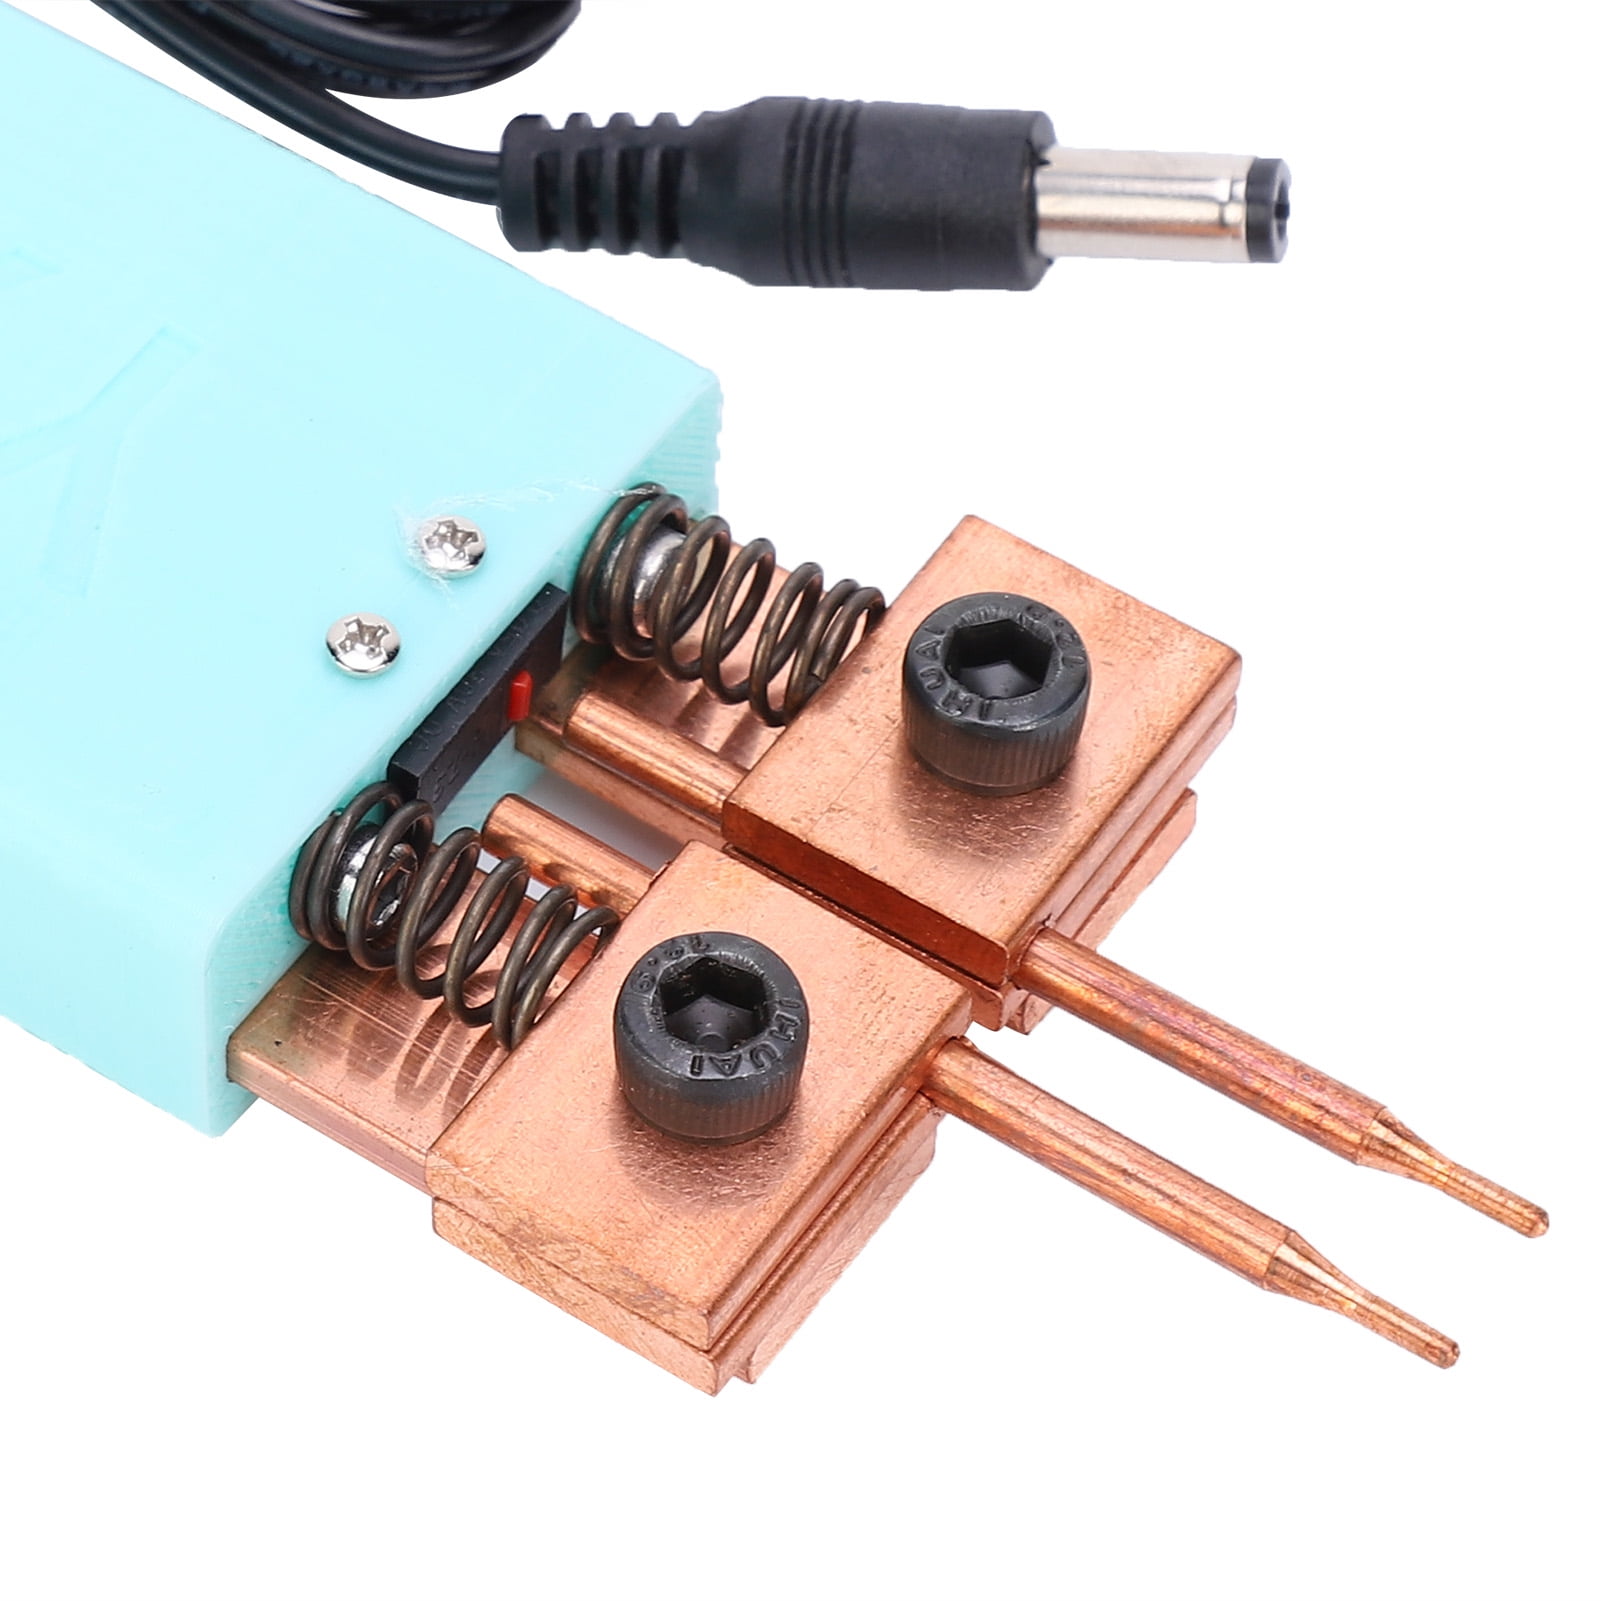 18650 Cyan Automatic Trigger Handheld Welding Tool Integrated Spot Welder Pen with A Pair of Japanese Concentric Ball Head Needles for Industrial Spot Welding 